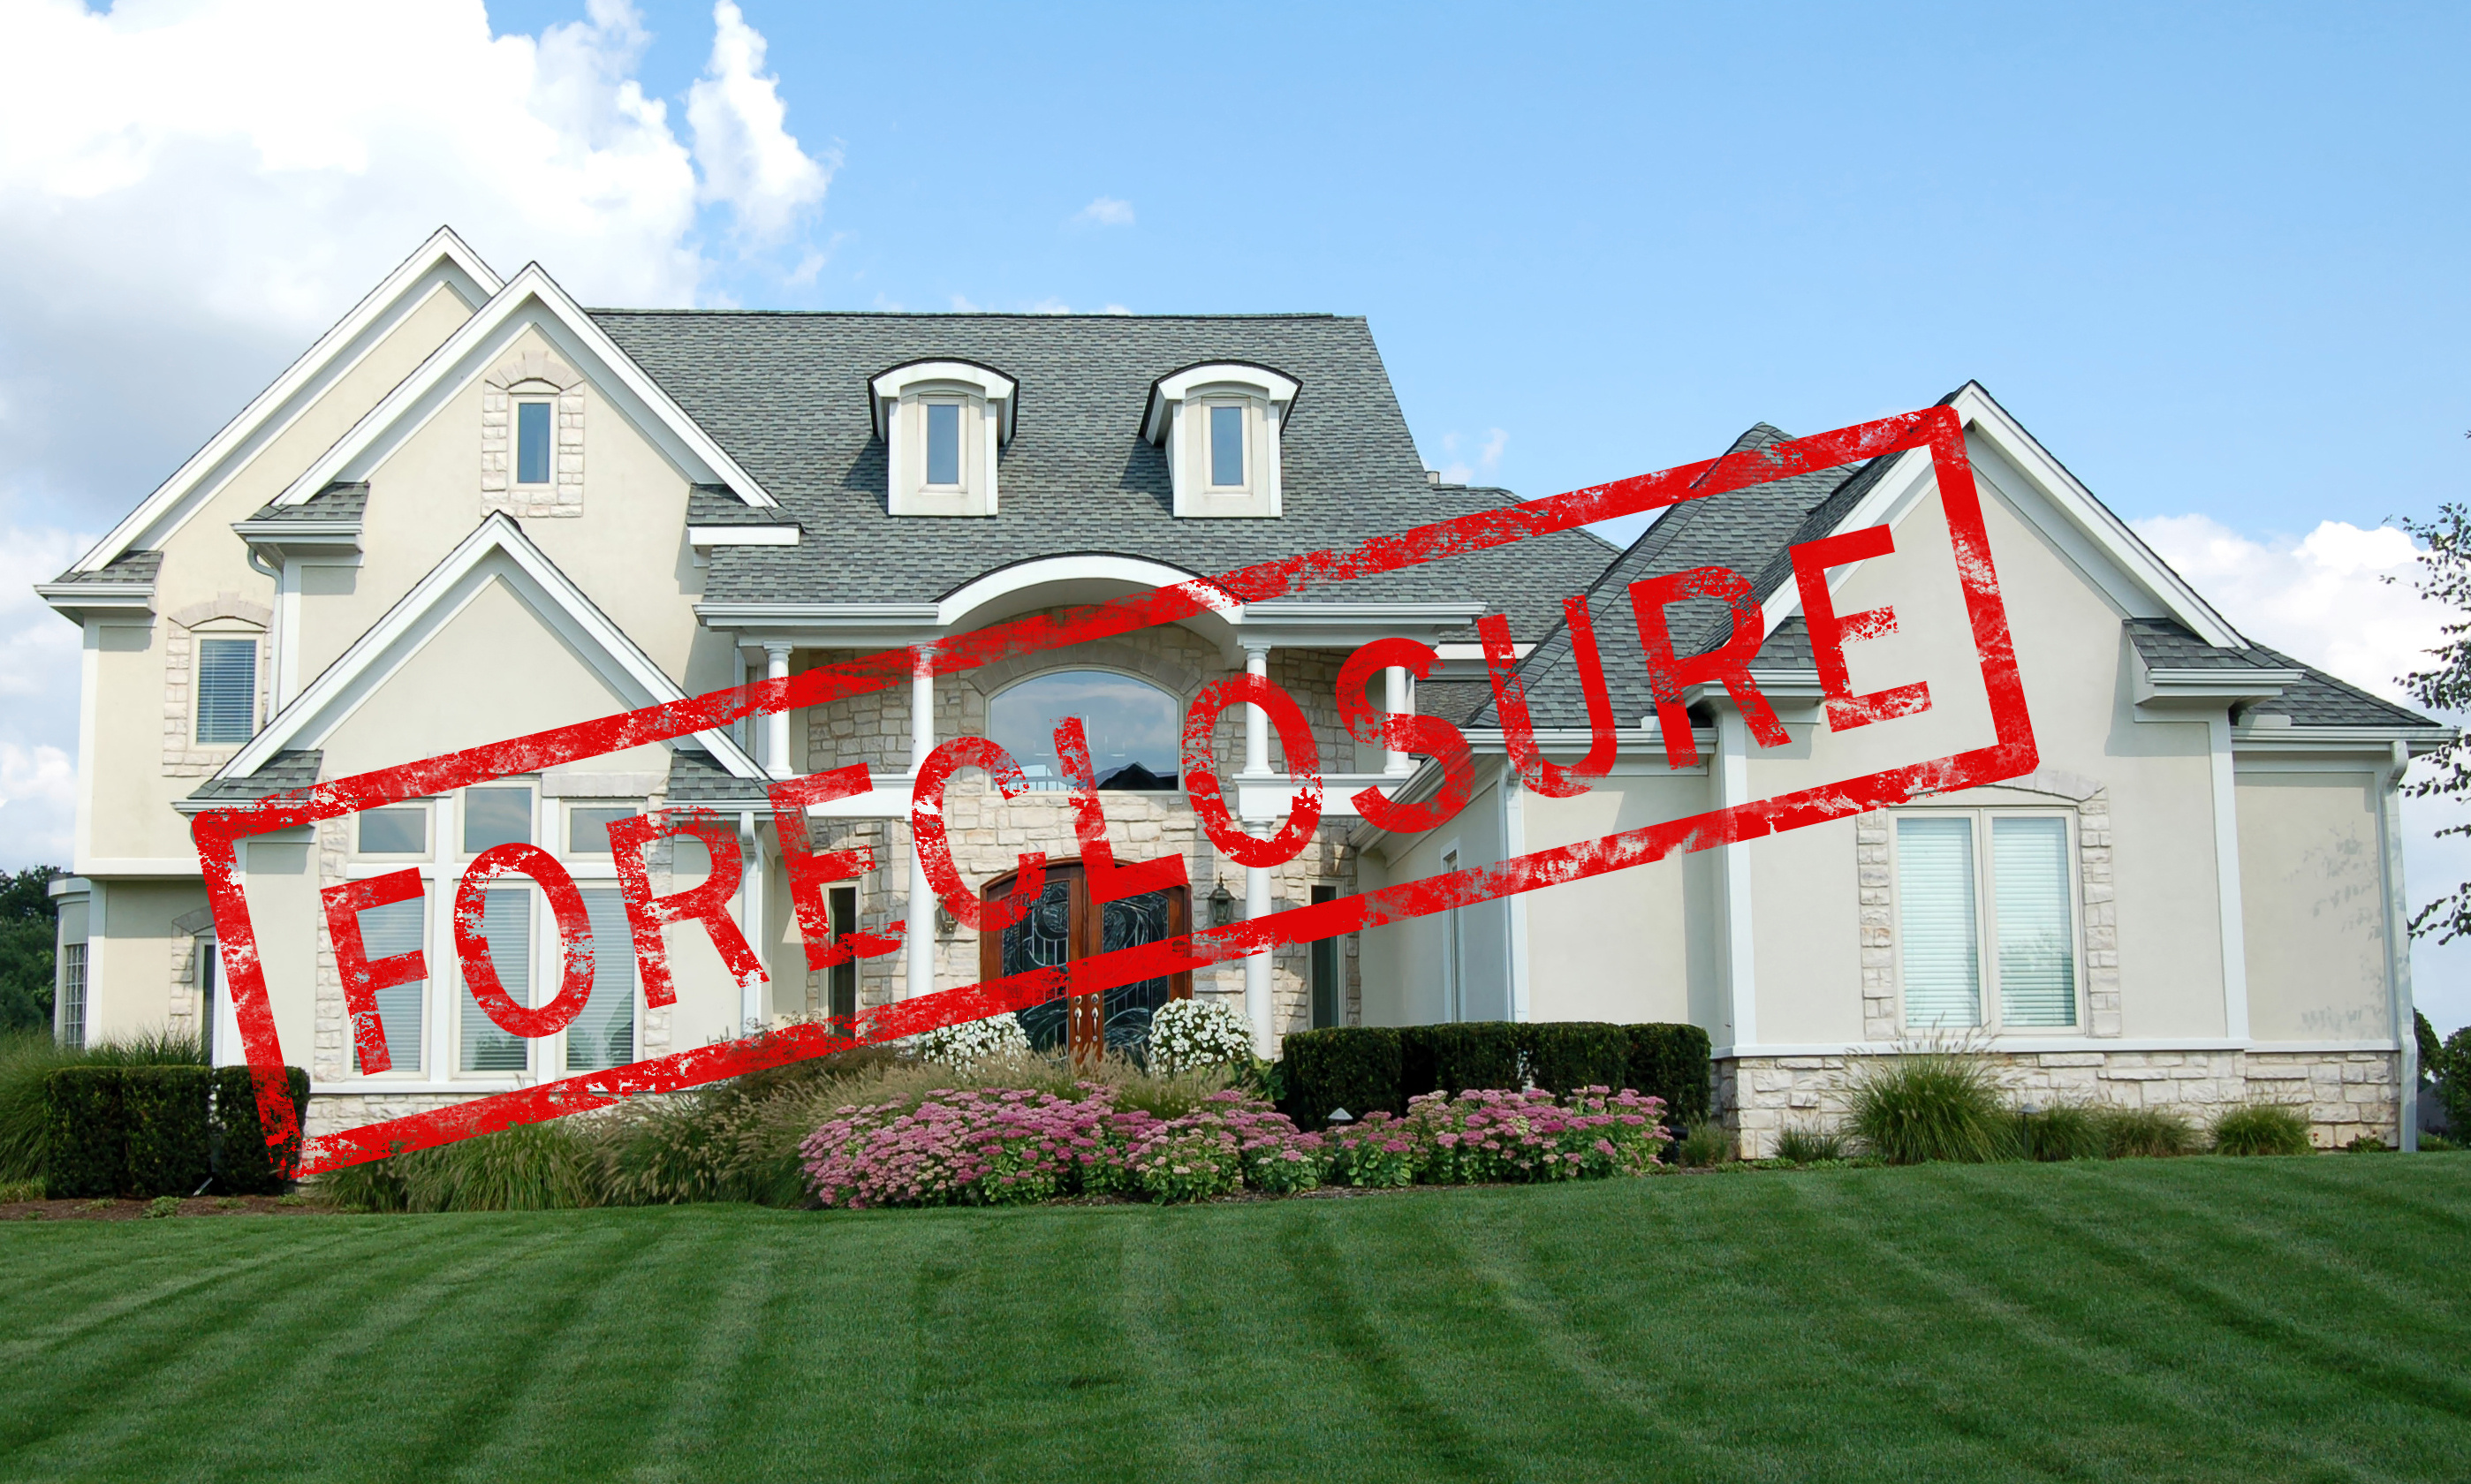 Call Diversified Real Estate Activities Inc.  (805) 388-5507 when you need valuations for Ventura foreclosures